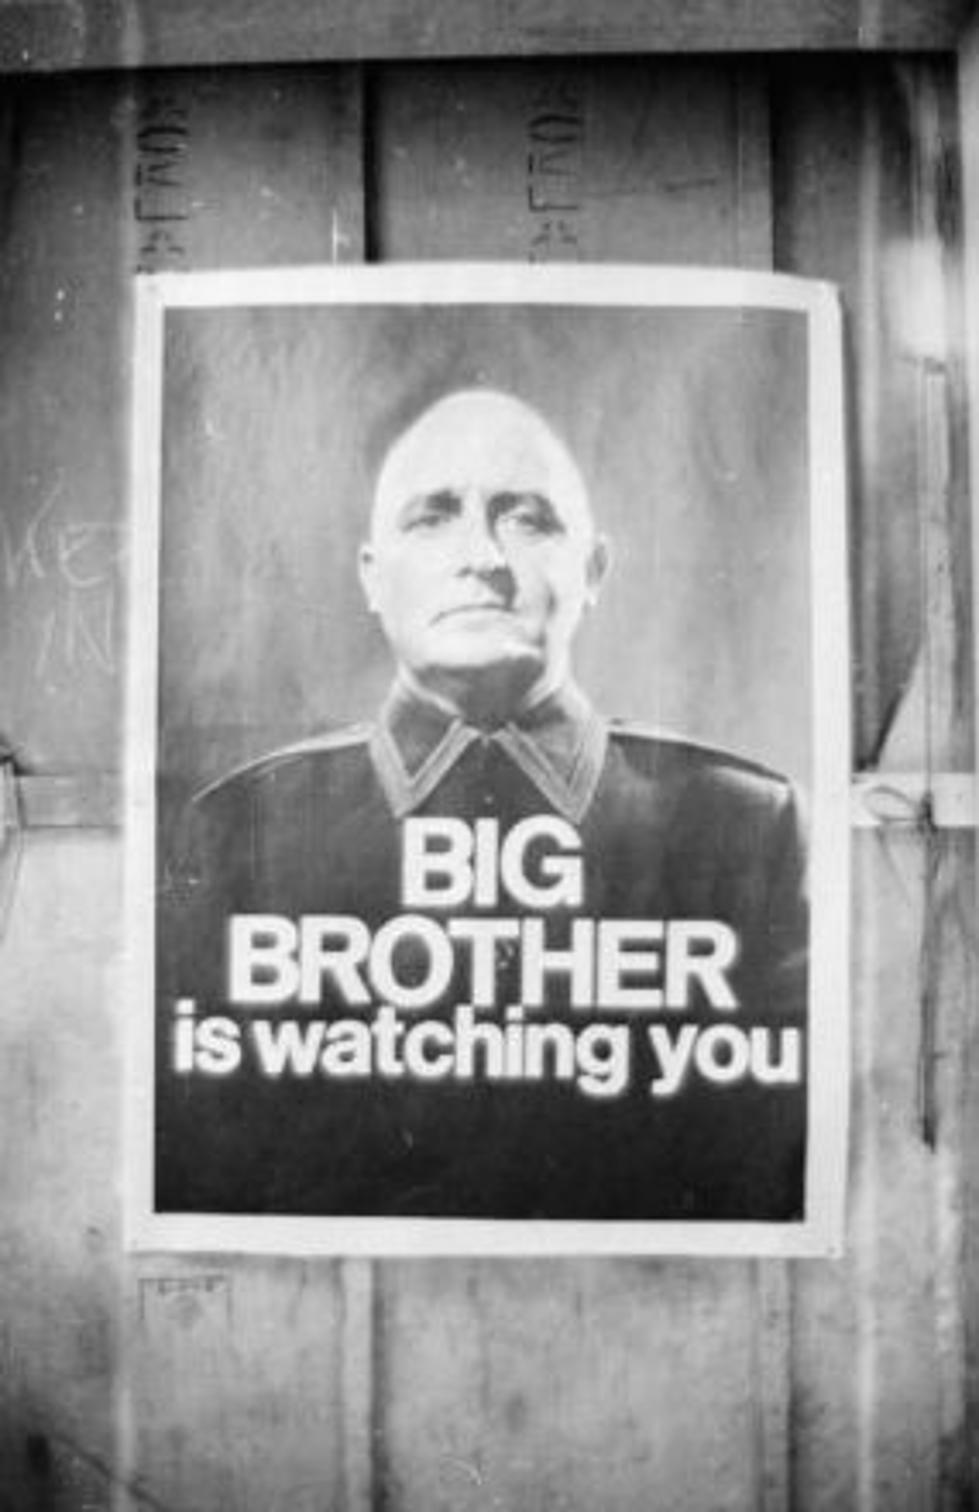 NSA, Verizon, IRS – Is “Big Brother” Really Watching Us?  Your Thoughts?  [POLL]